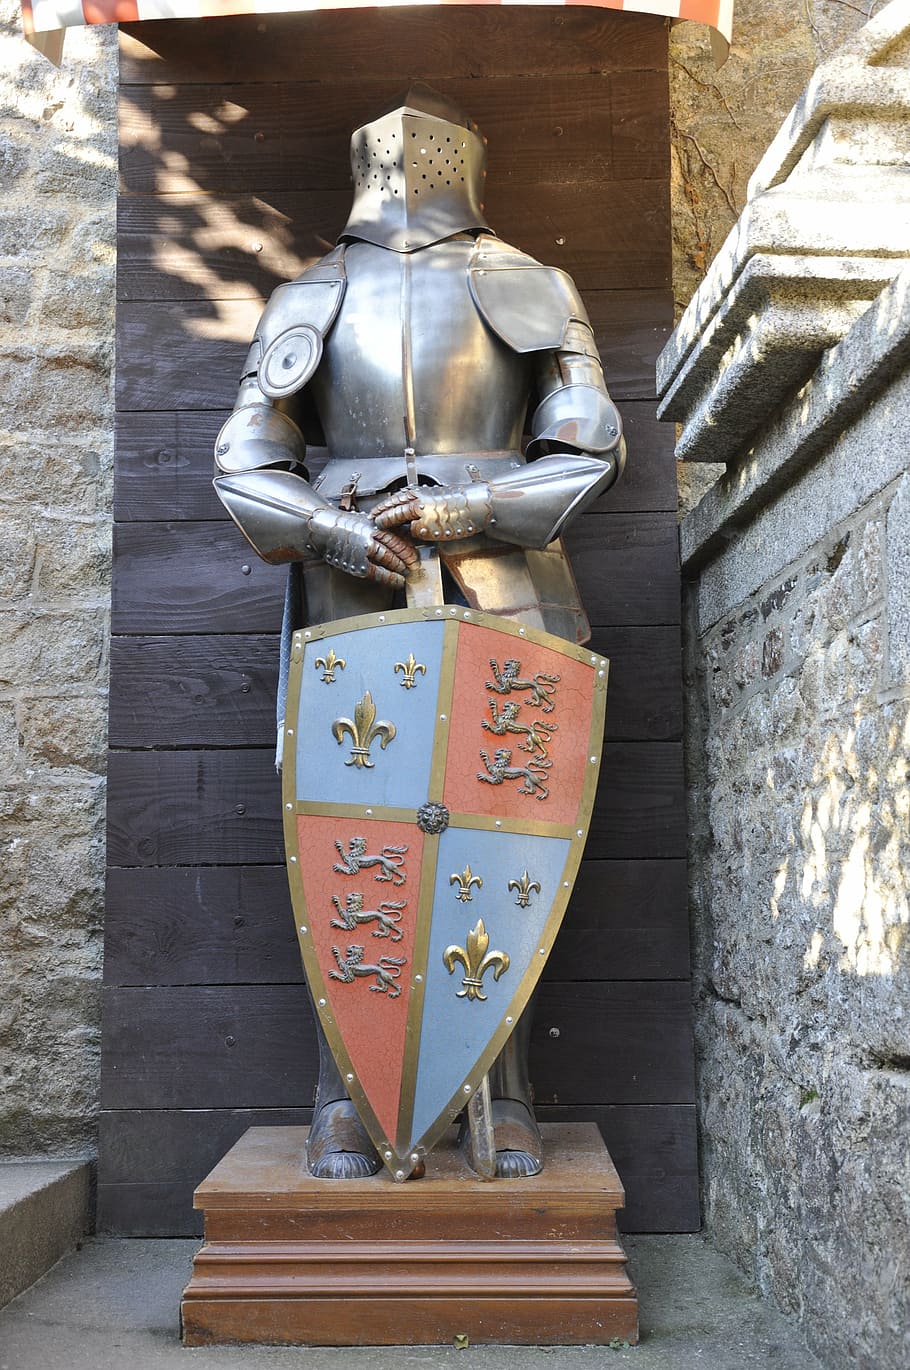 silver full-plate armor, armor, history, coat of arms, mont saint michel, france, pierre, castle, church, monument